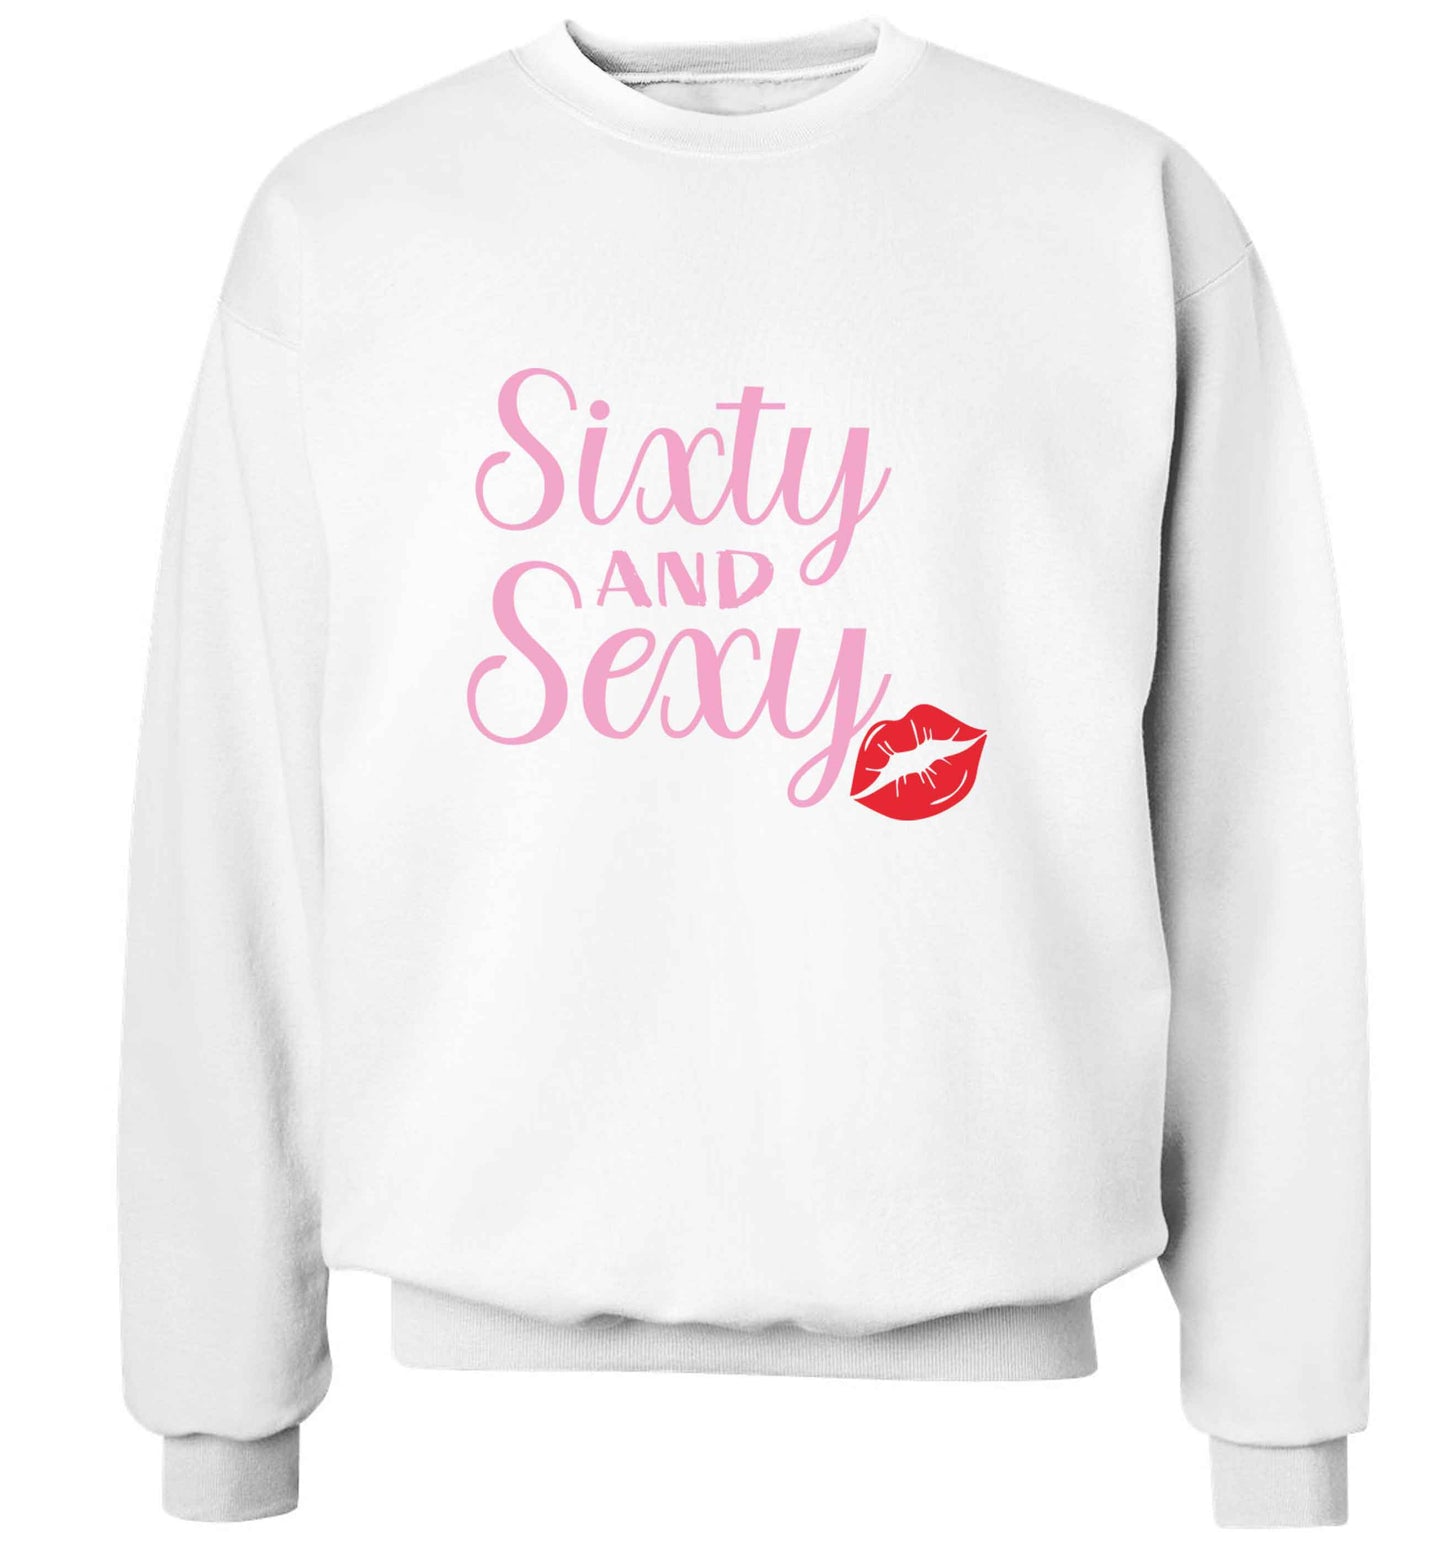 Sixty and sexy adult's unisex white sweater 2XL